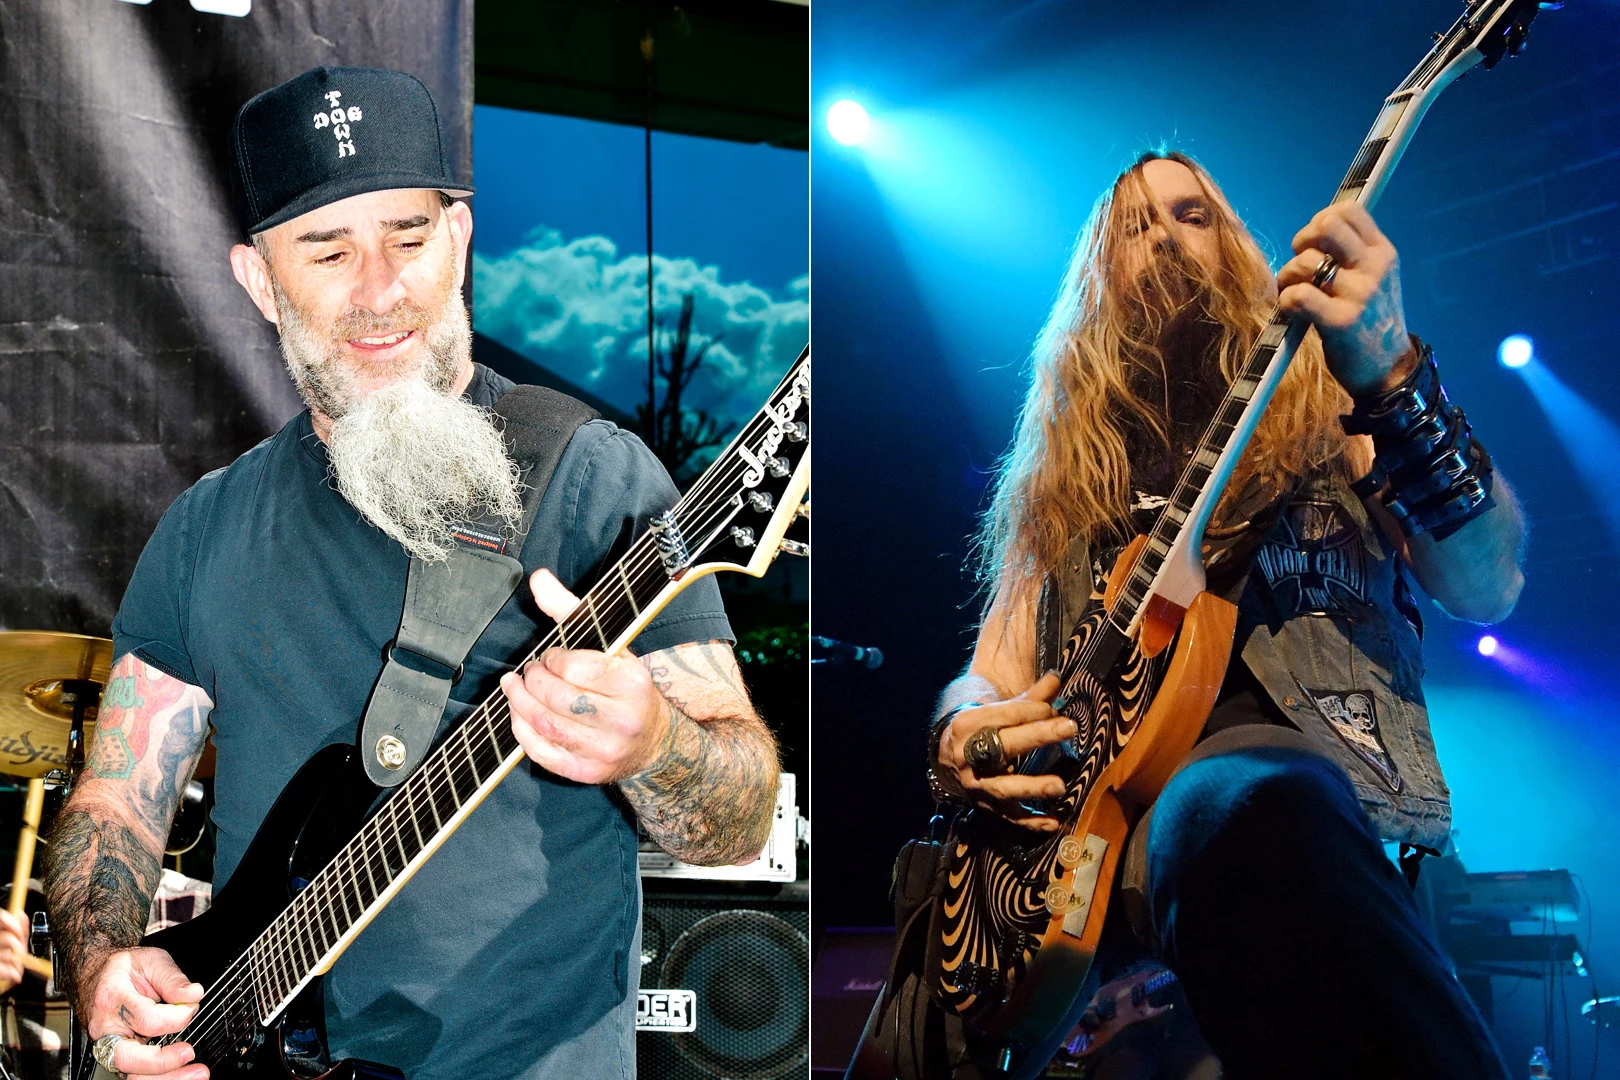 Anthrax and Black Label Society delight at returning Tattoo The Earth   MetalTalk  Heavy Metal News Reviews and Interviews